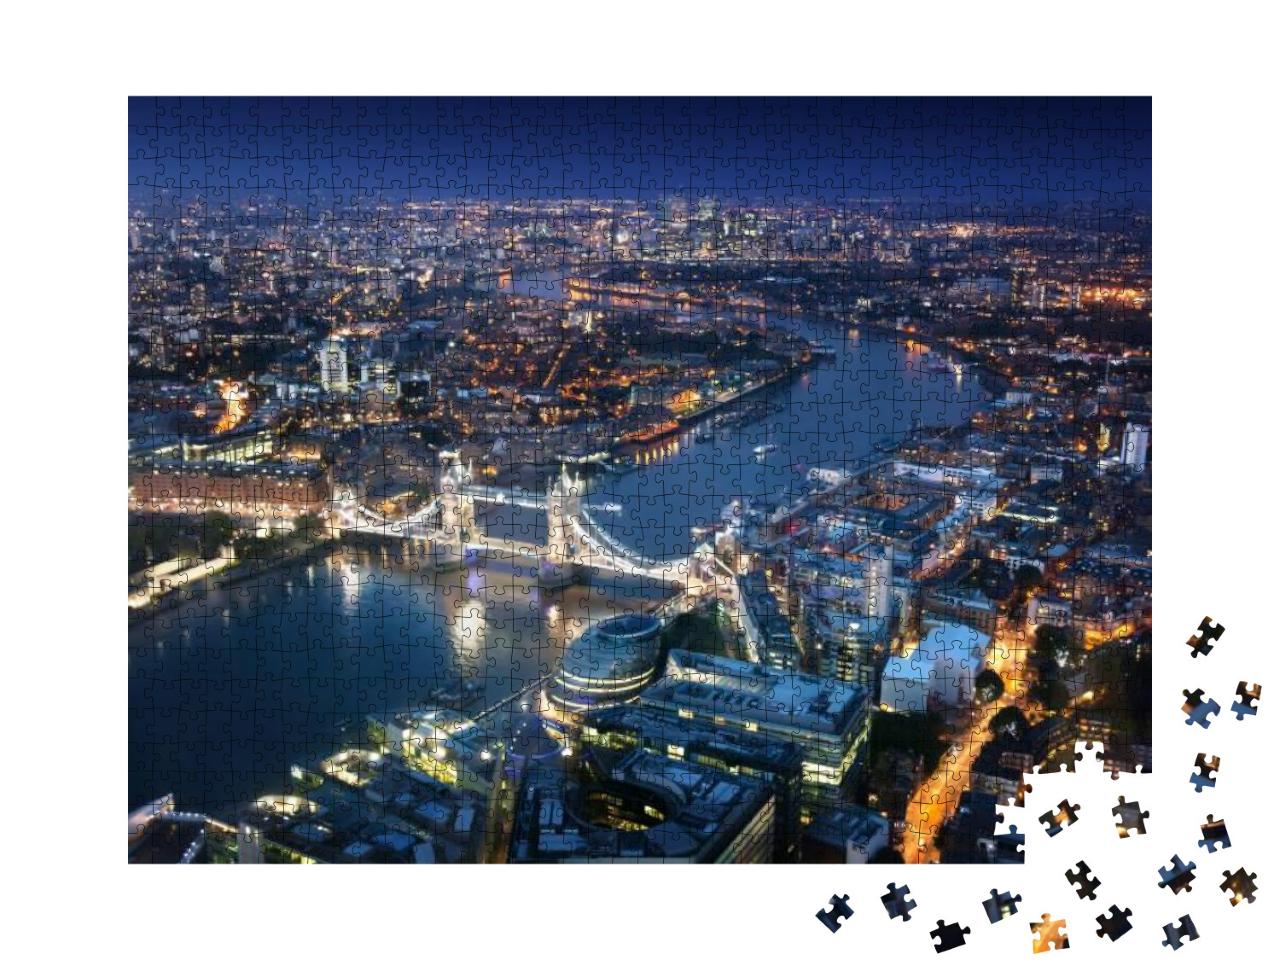 London At Night with Urban Architectures & Tower Bridge... Jigsaw Puzzle with 1000 pieces